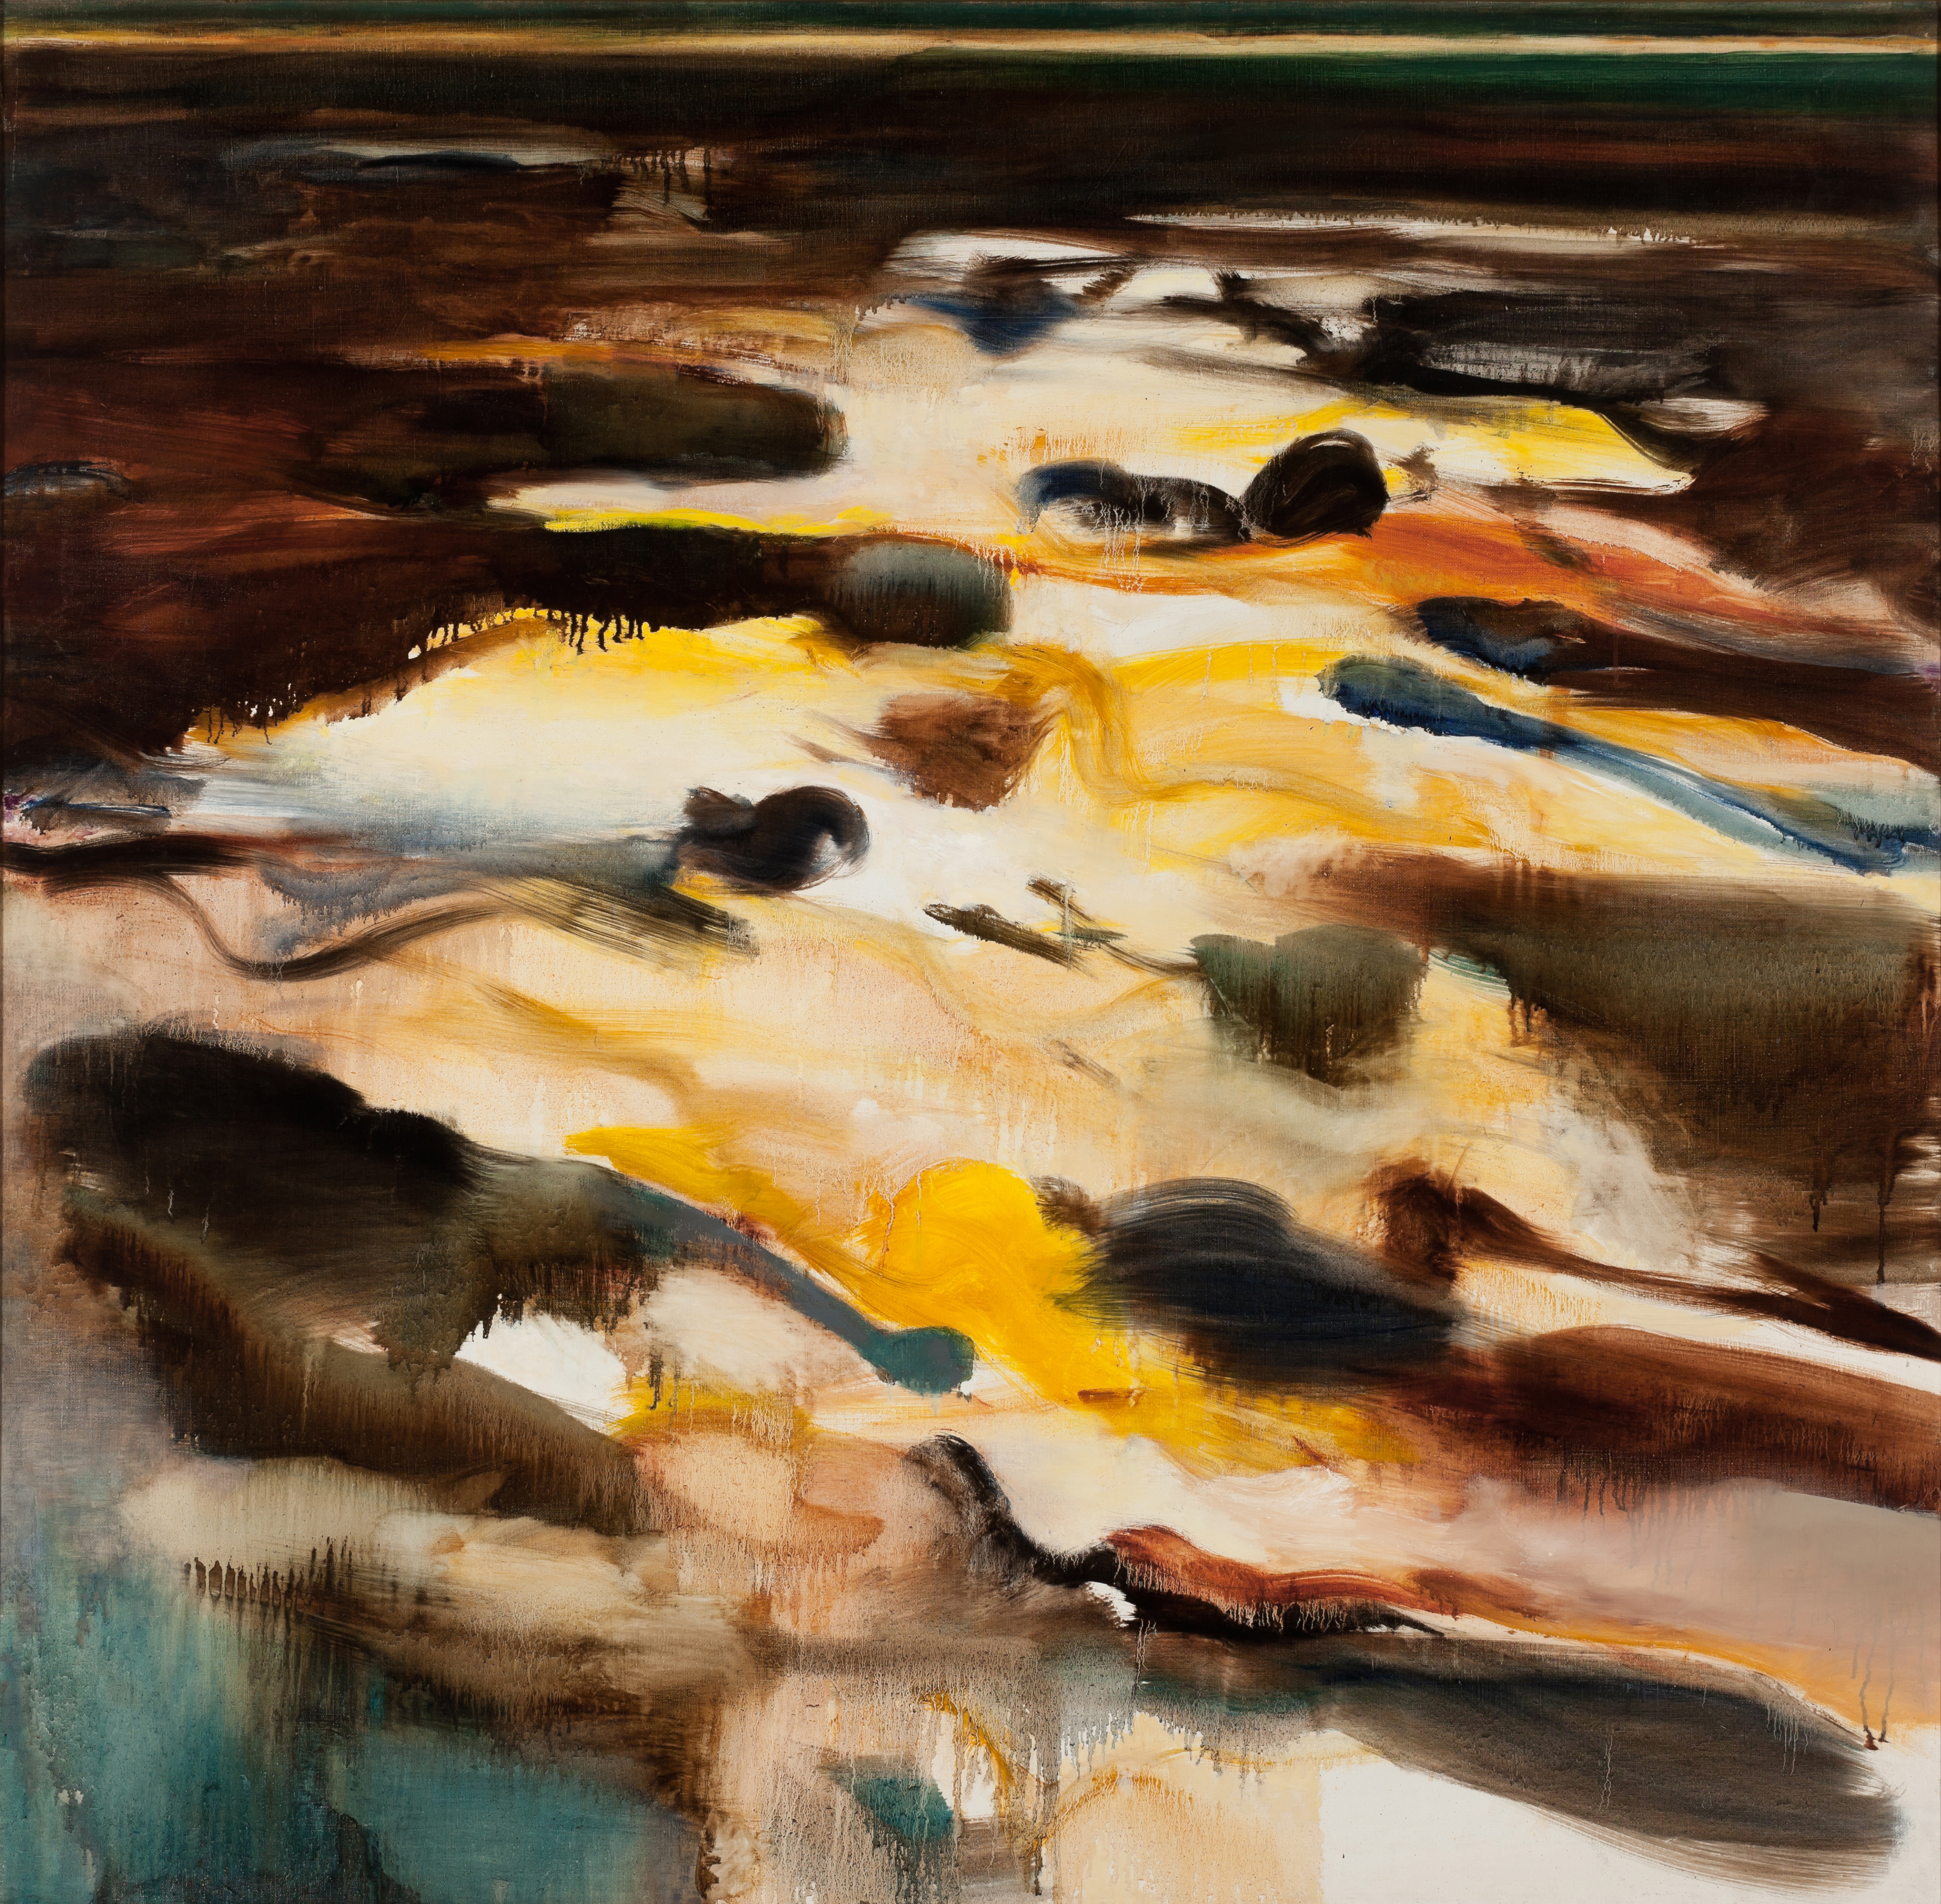 Barrie Cooke Night Lake Yellow 1979. Oil on canvas, 136 x 144 cm. Collection of the Arts Council/An Chomhairle Ealaíon 